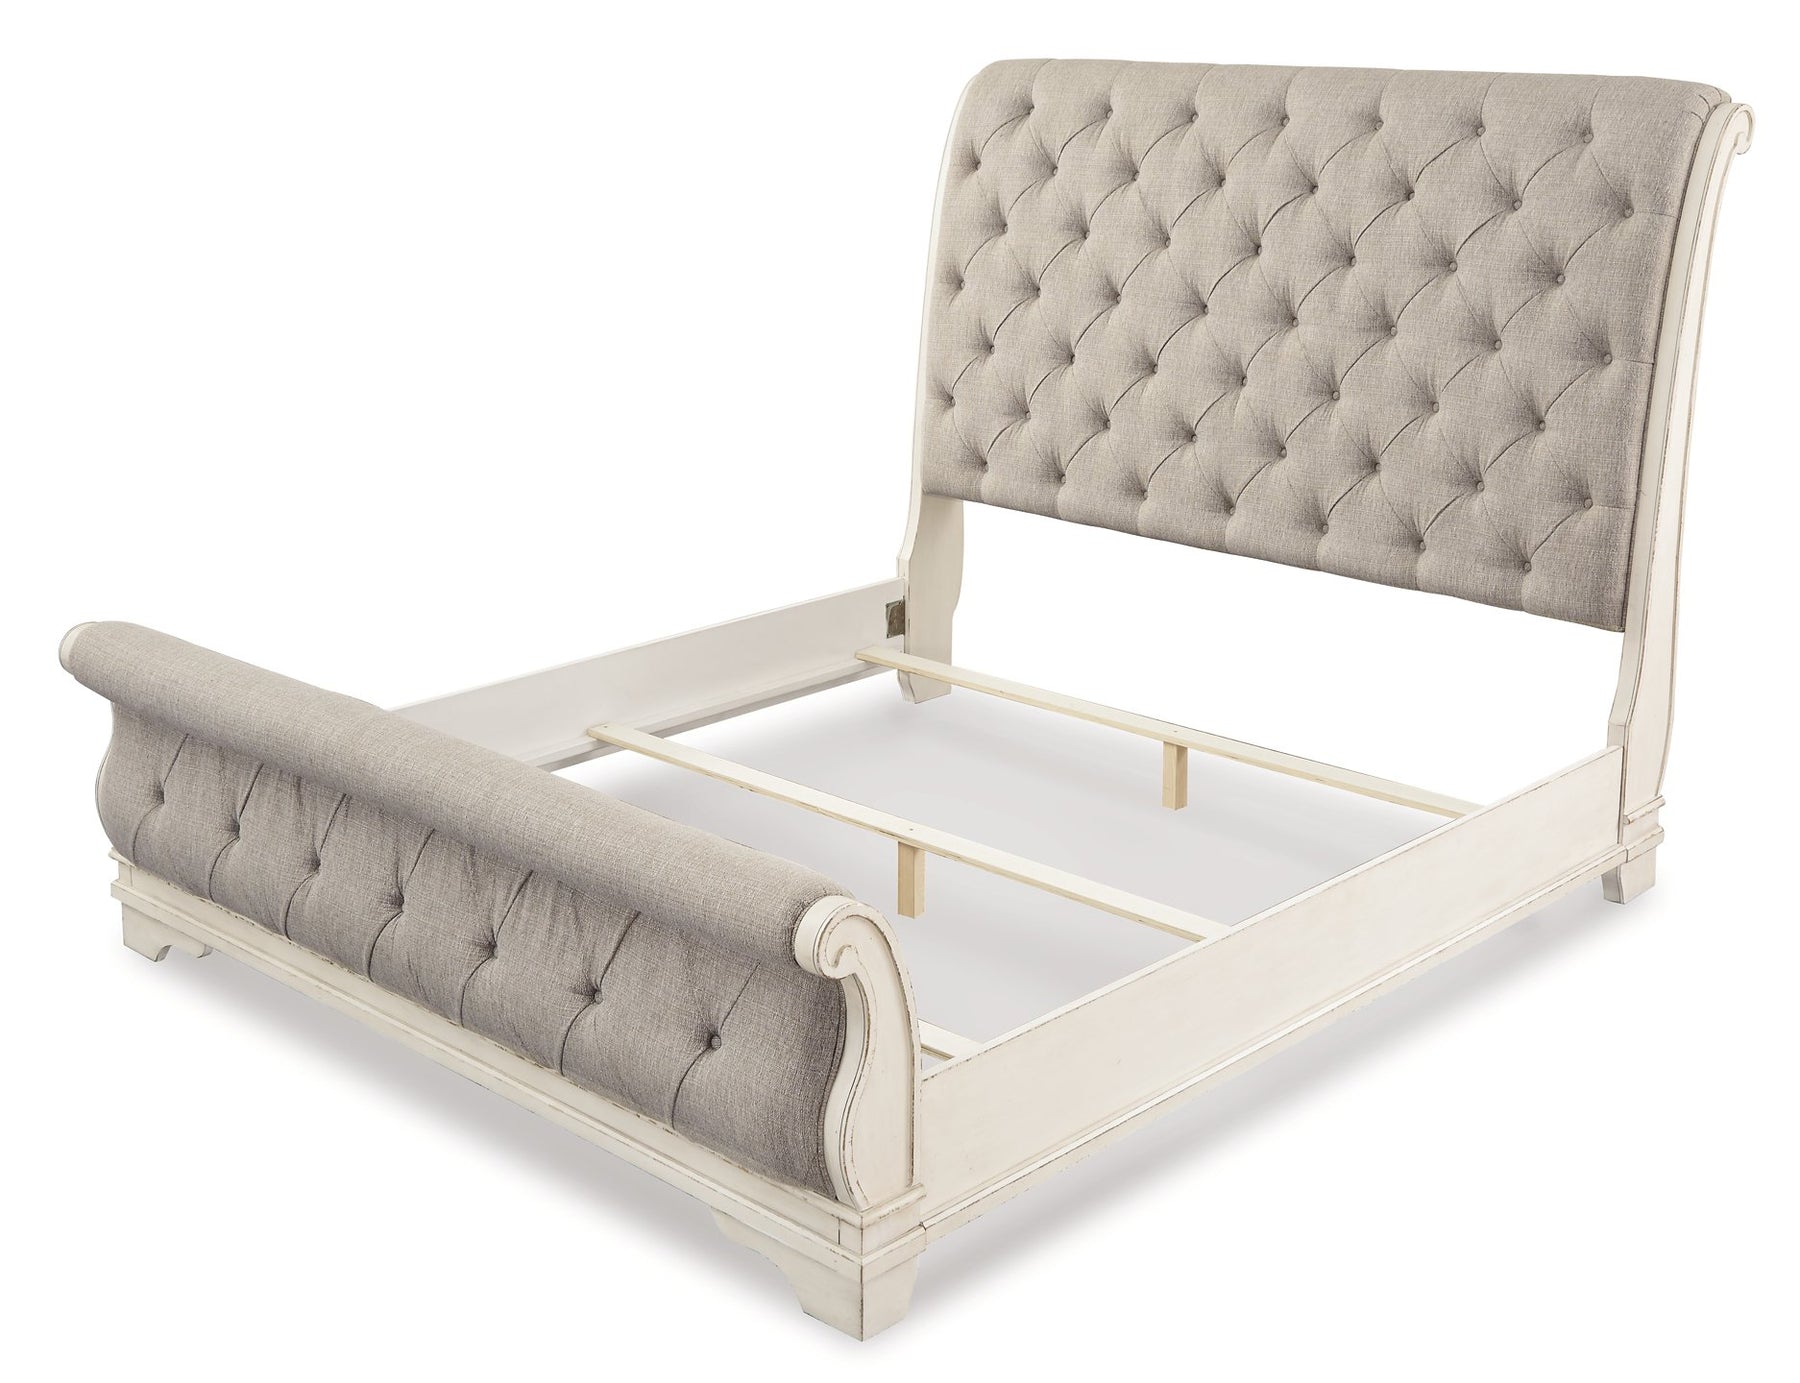 Realyn Bed - Half Price Furniture